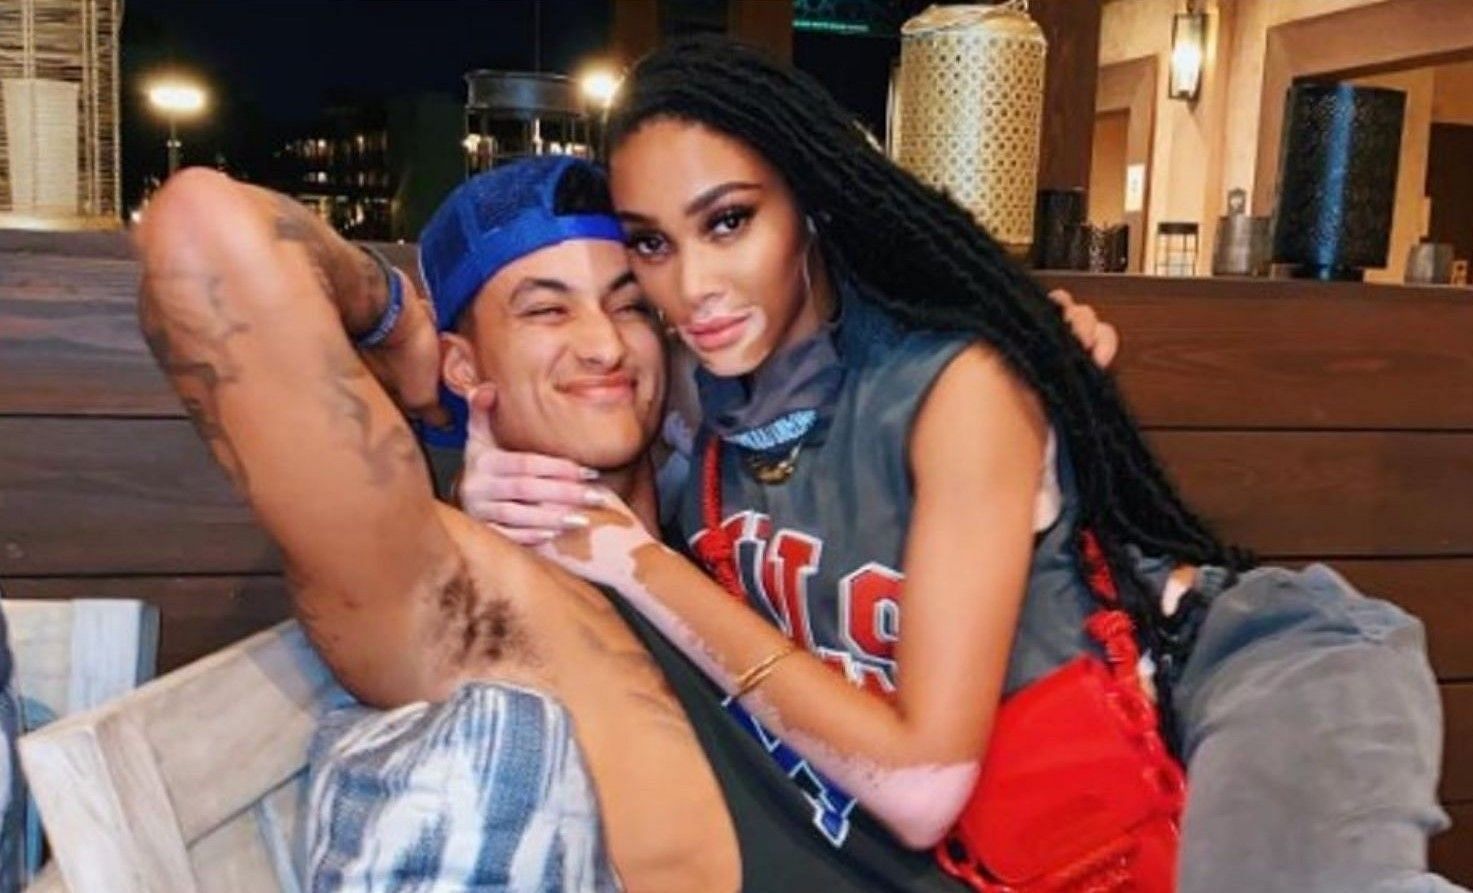 Kyle Kuzma&rsquo;s girlfriend Winnie Harlow recently posted on her Instagram story a photo of them on a date night.